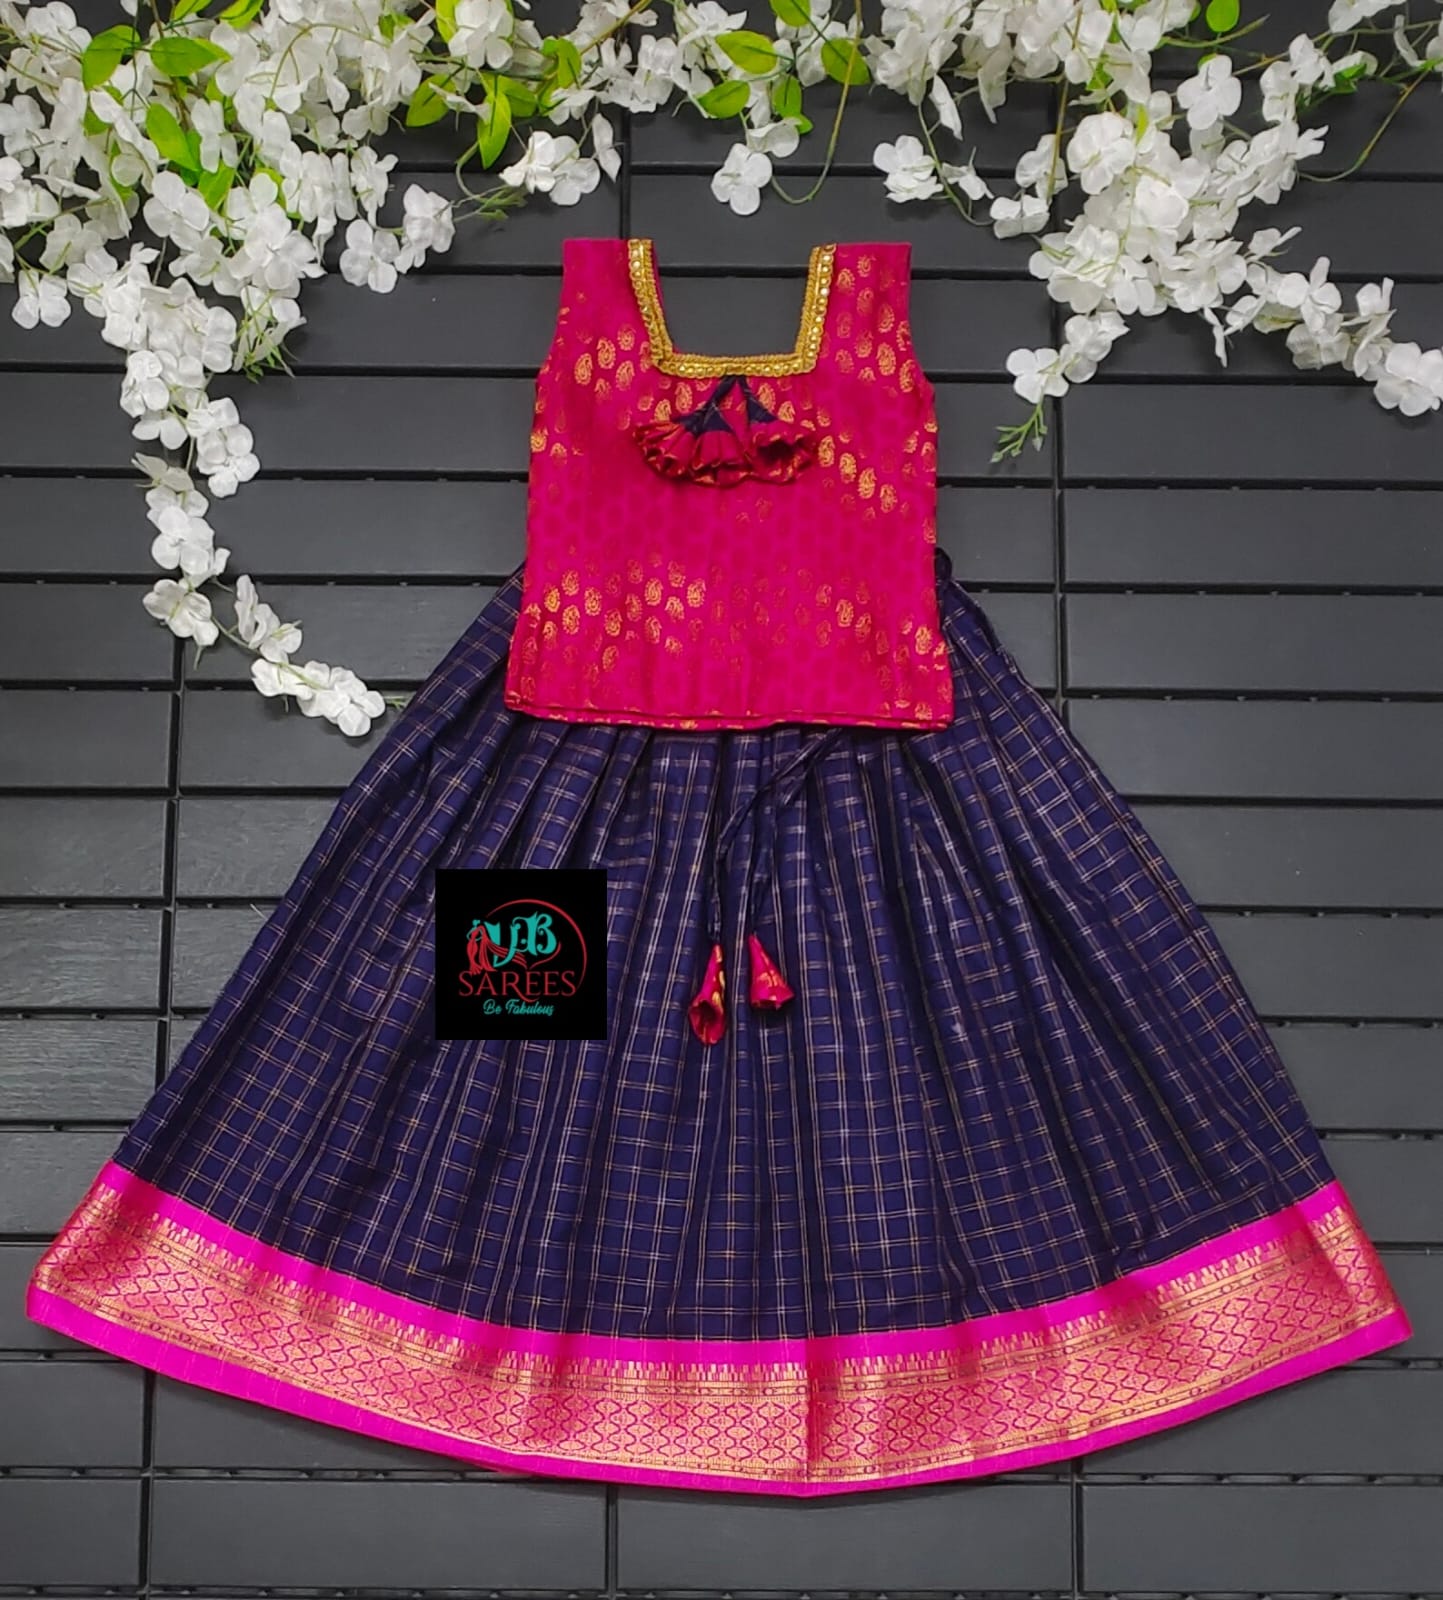 Girls School Uniform Little Black Dress Daily Wear Clothing For Kids Sizes  4 14 Q0716 From Sihuai04, $14.32 | DHgate.Com